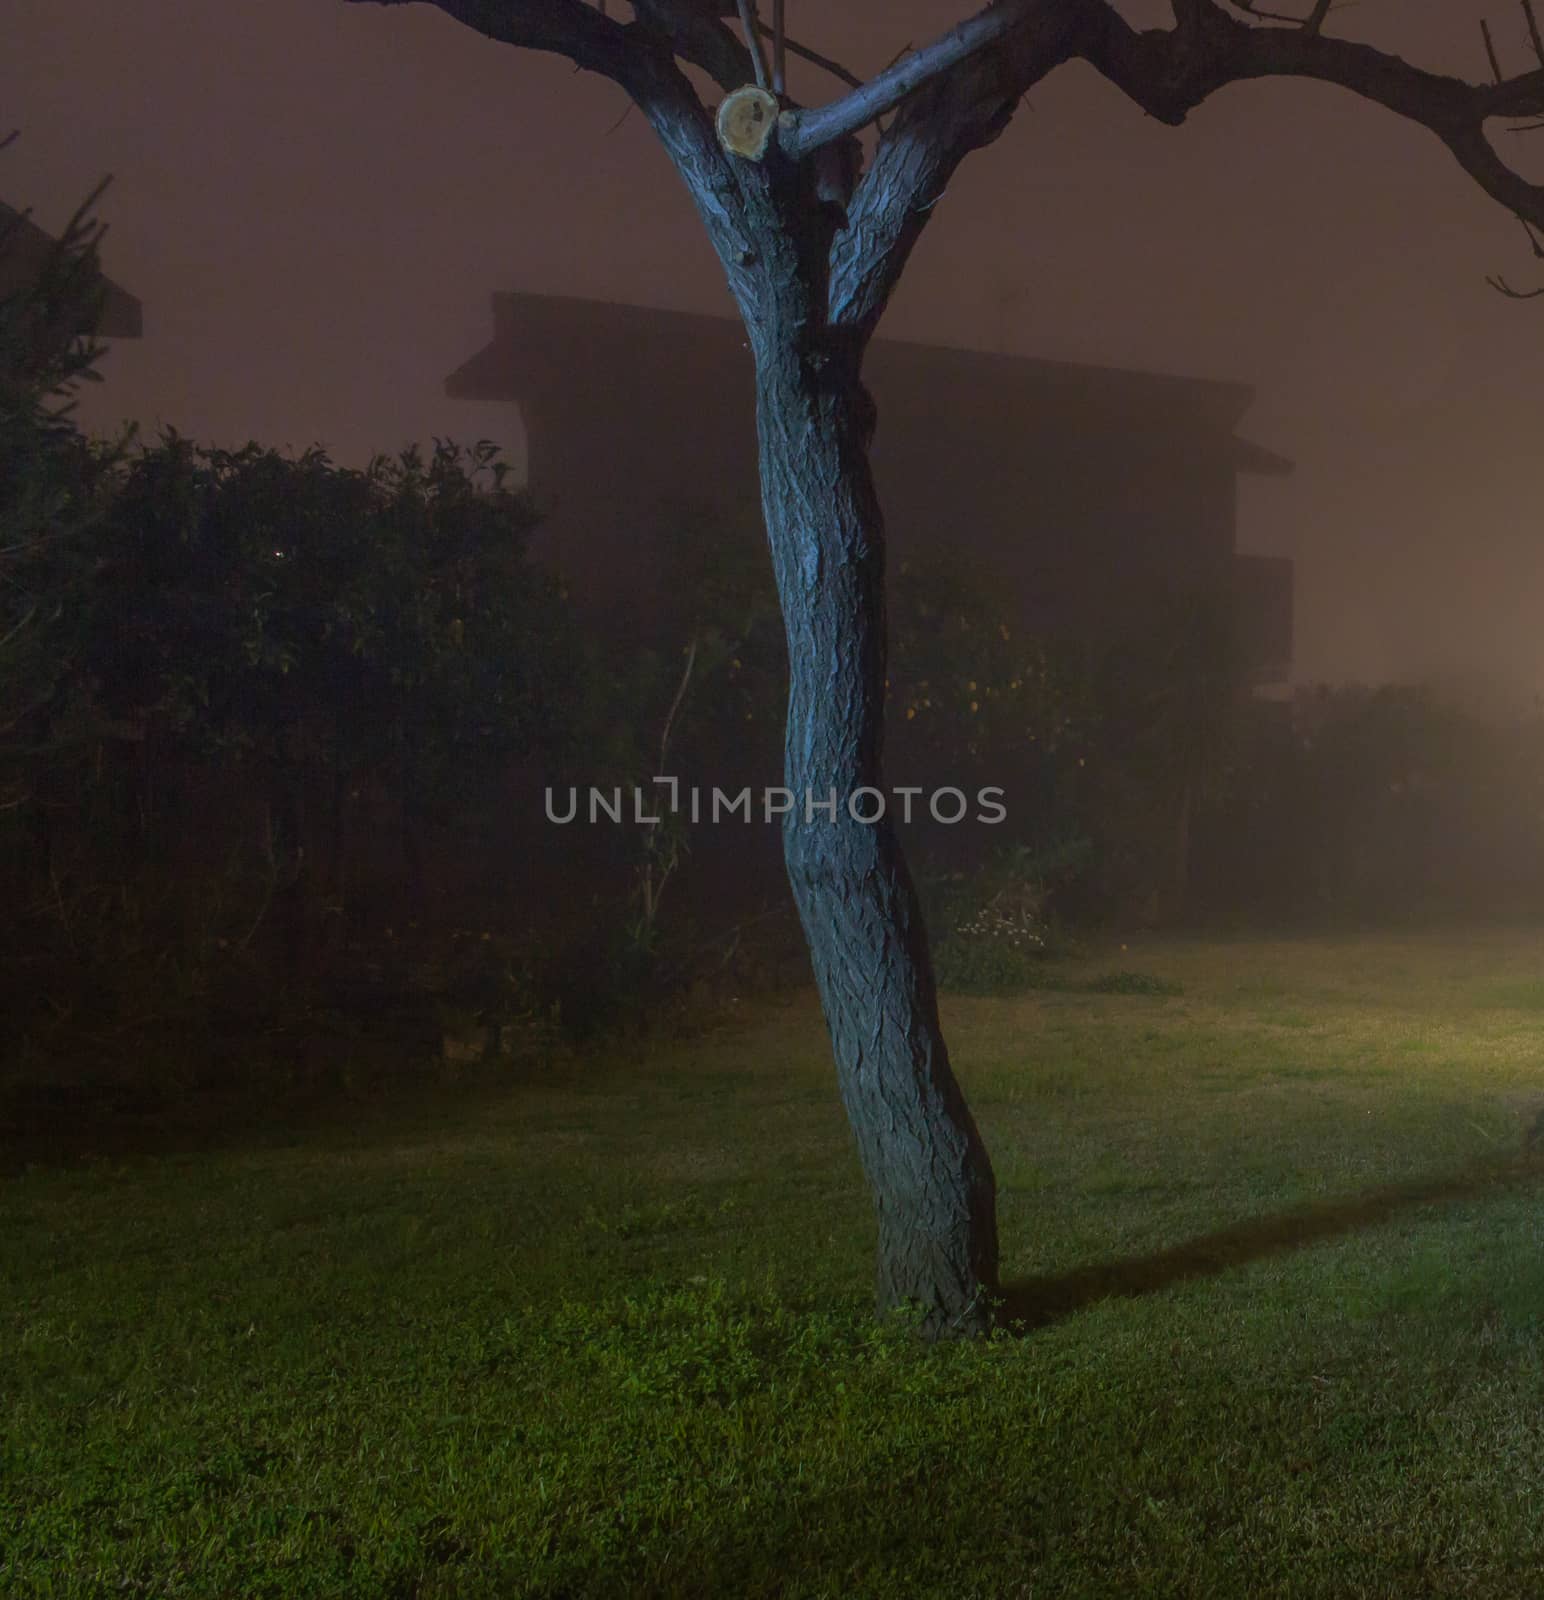 A very foggy evening in autumn time